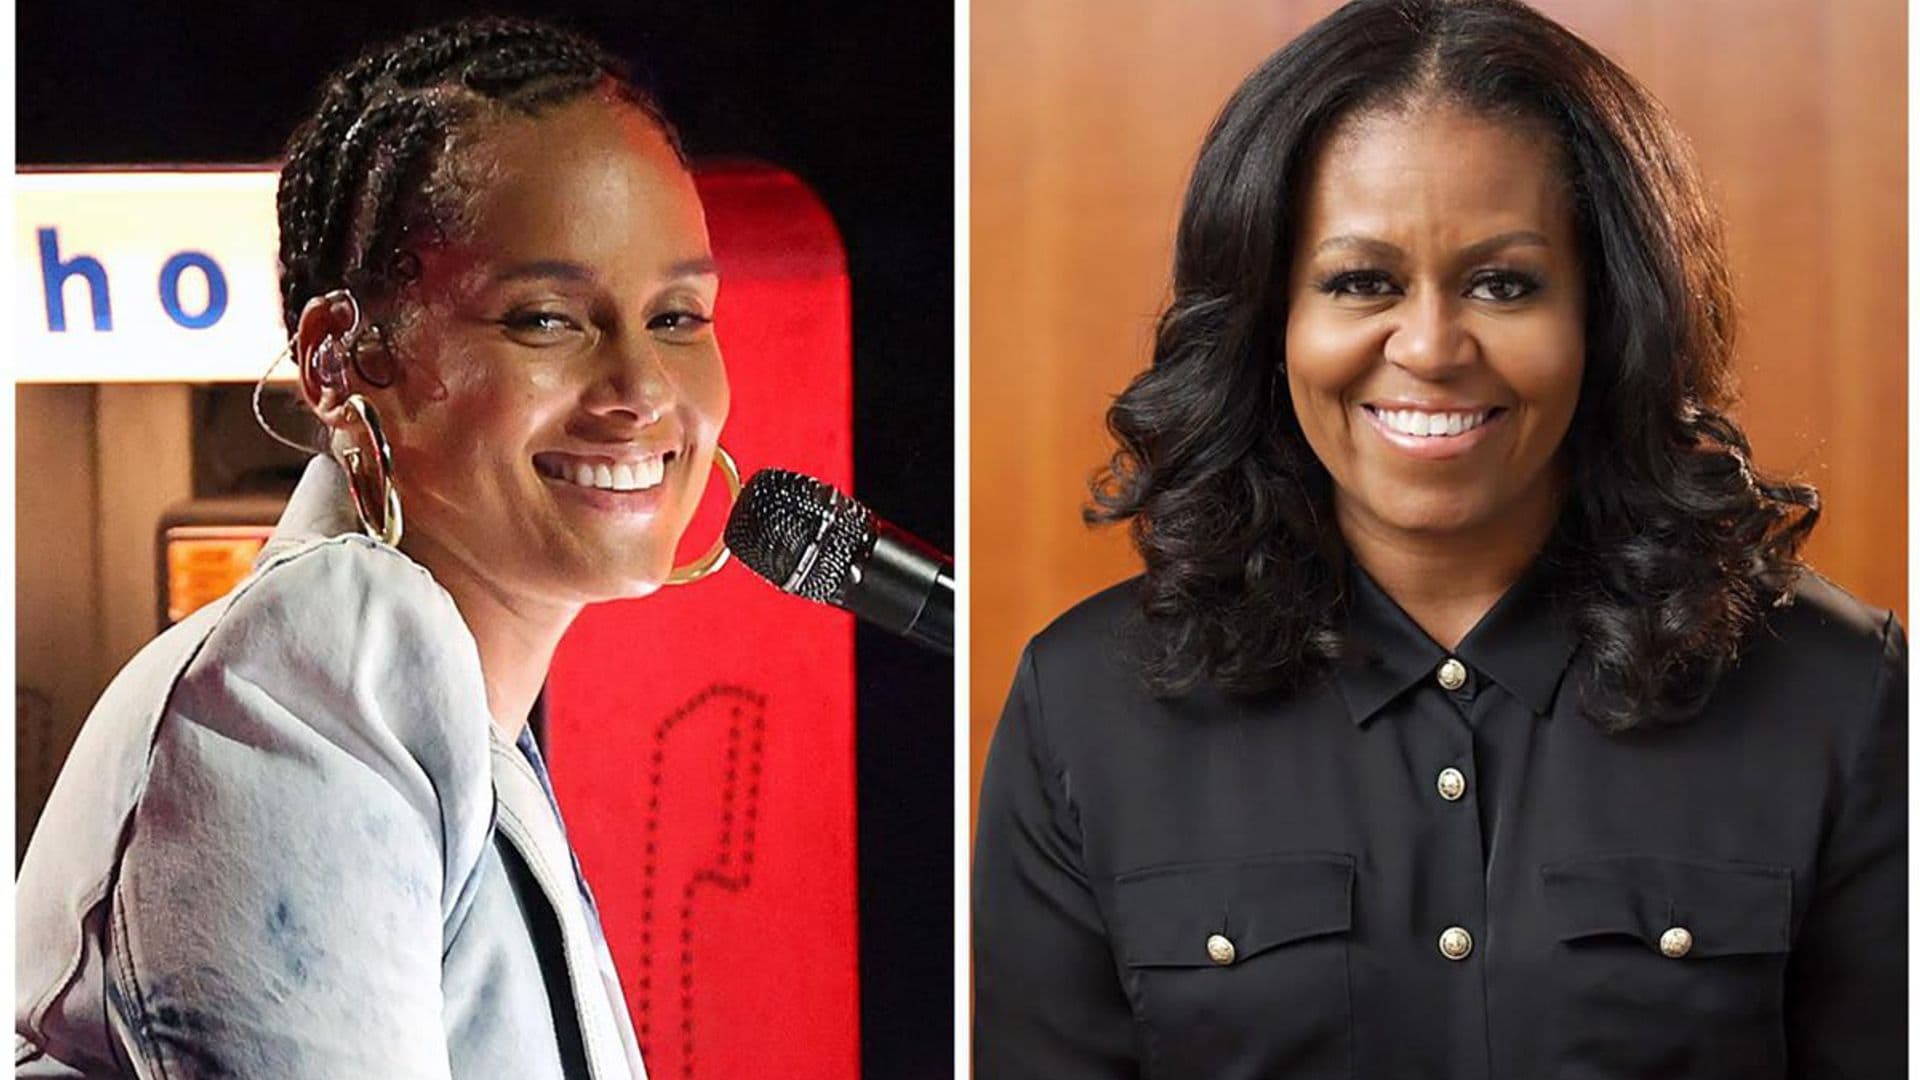 Former First Lady Michelle Obama celebrates Alicia Keys at the 2021 Billboard Music Awards